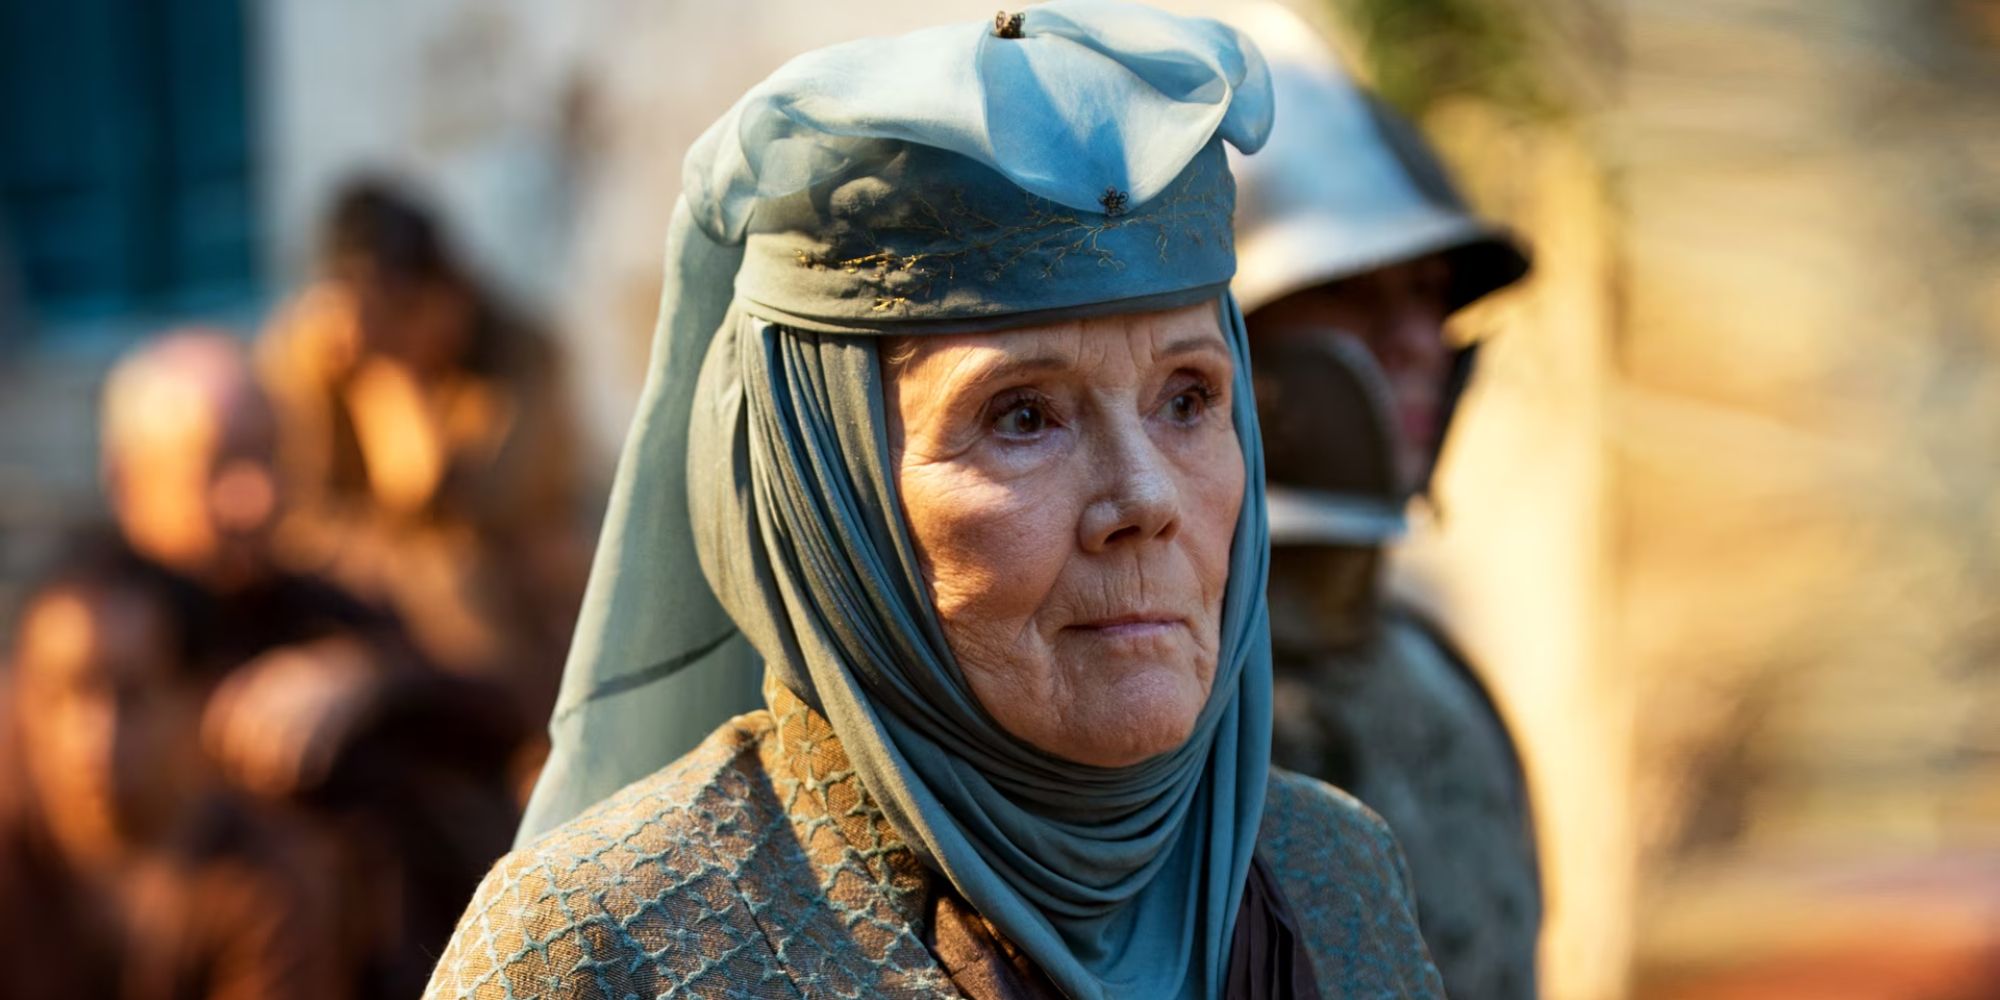 Olenna Tyrell from Game of Thrones